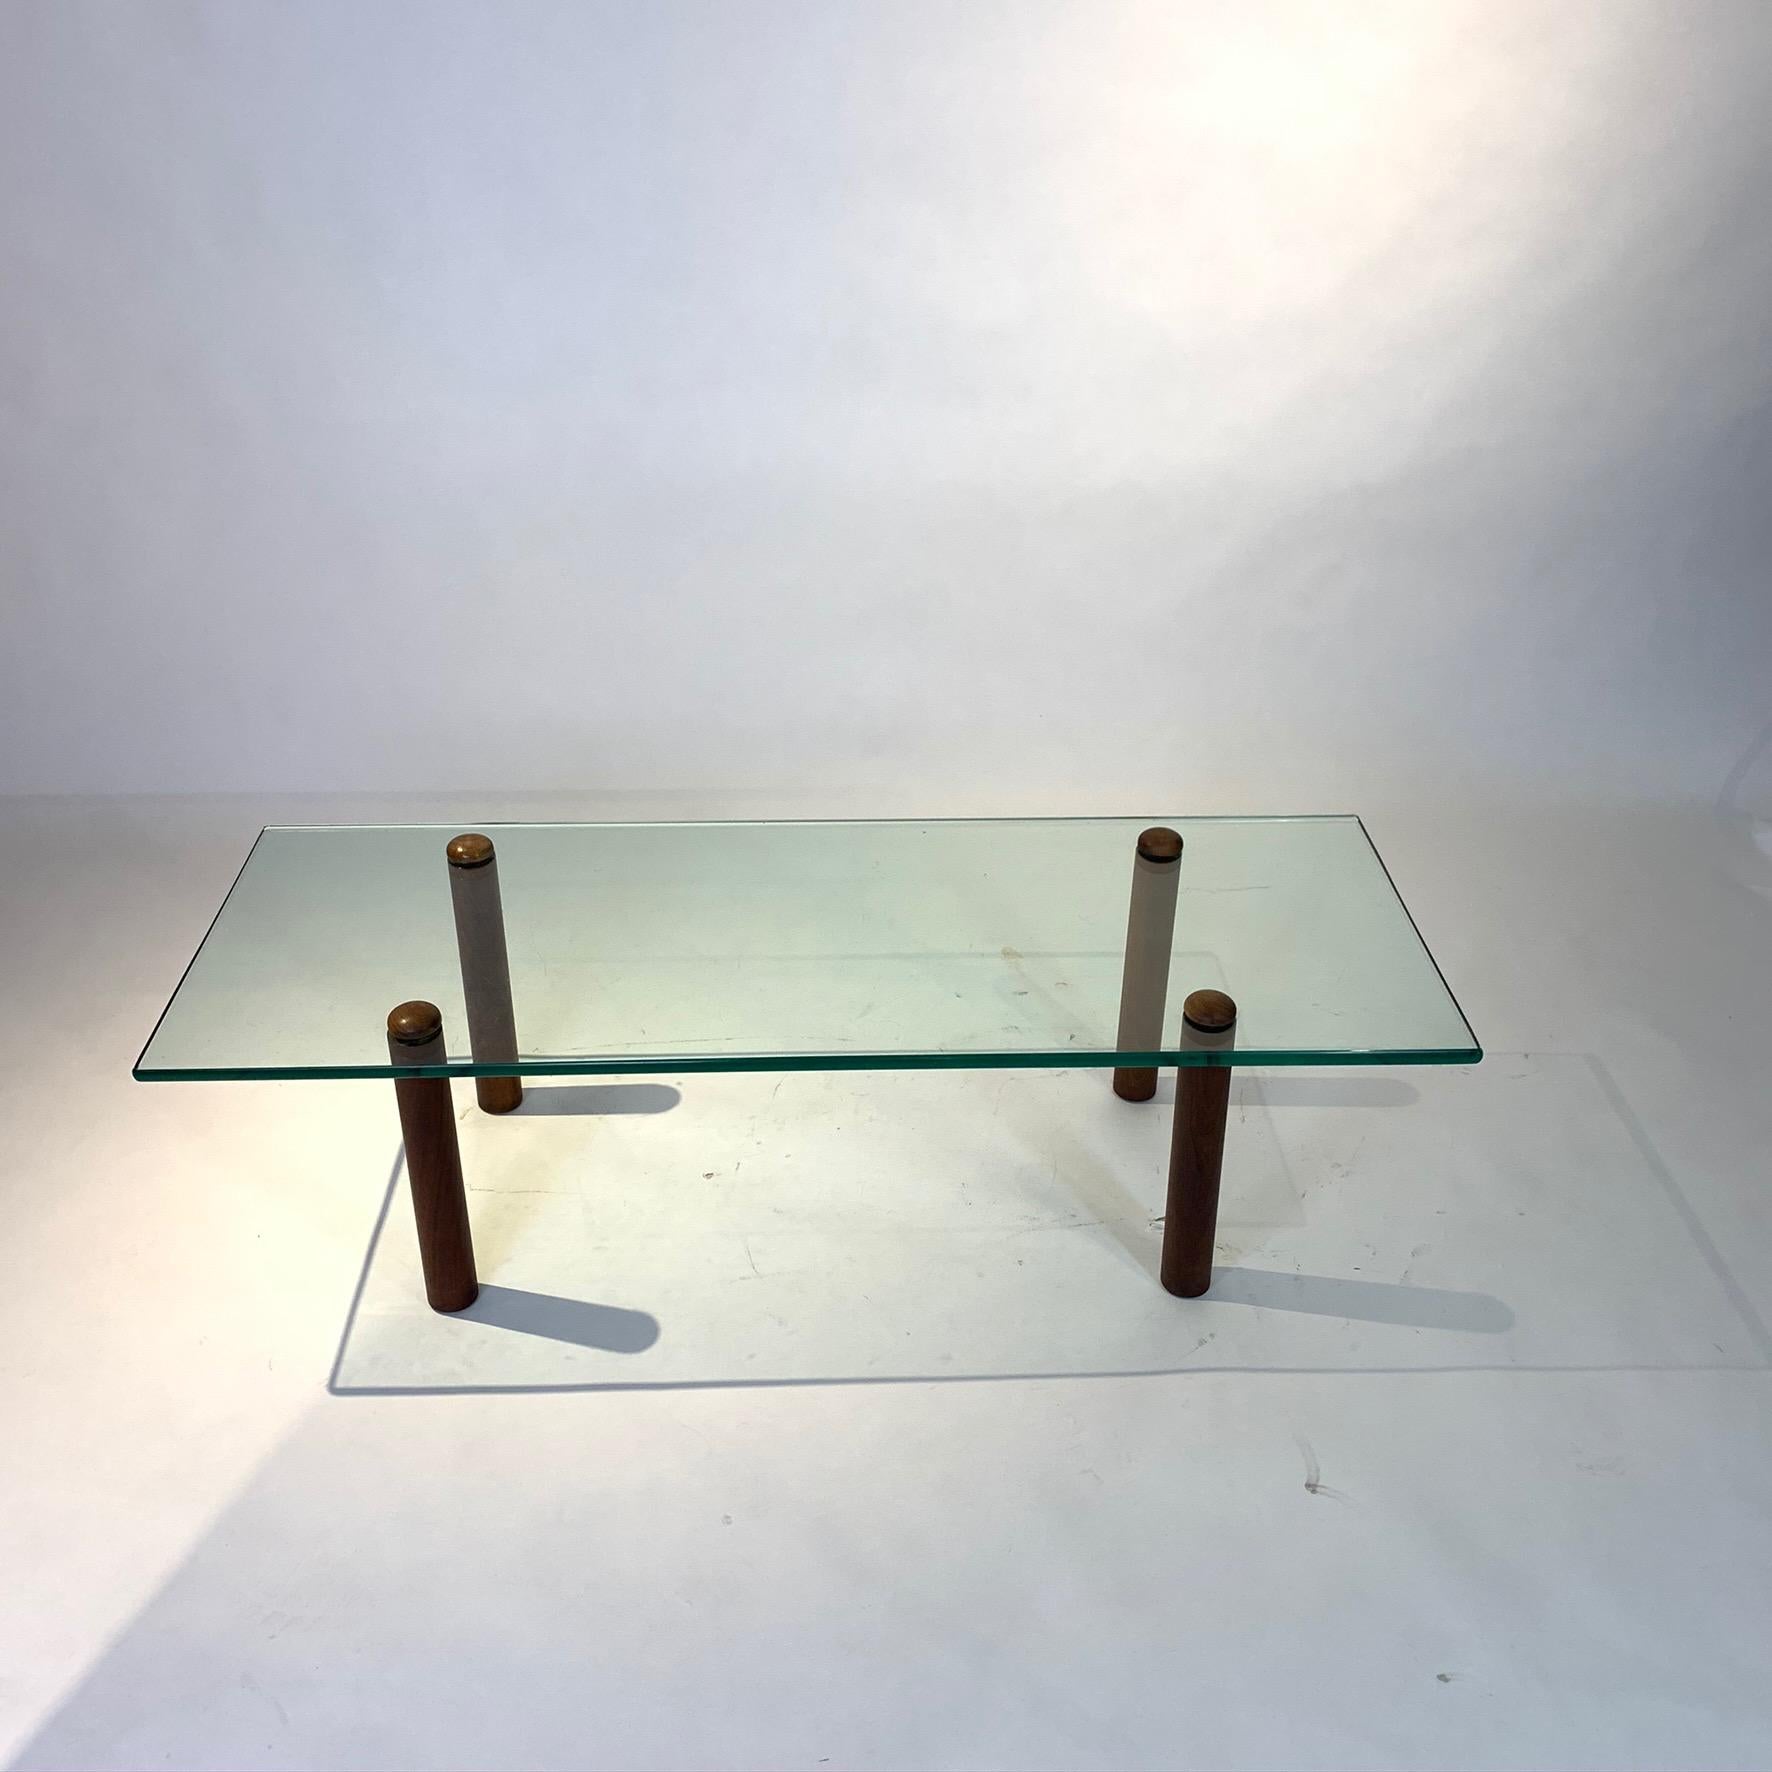 A very Classic yet simple coffee table designed by Gilbert Rohde for Herman Miller from the early 1940s. Walnut legs support thick green edged glass that has a floating effect. This table would work well with Classic Art Deco, Machine Age, or